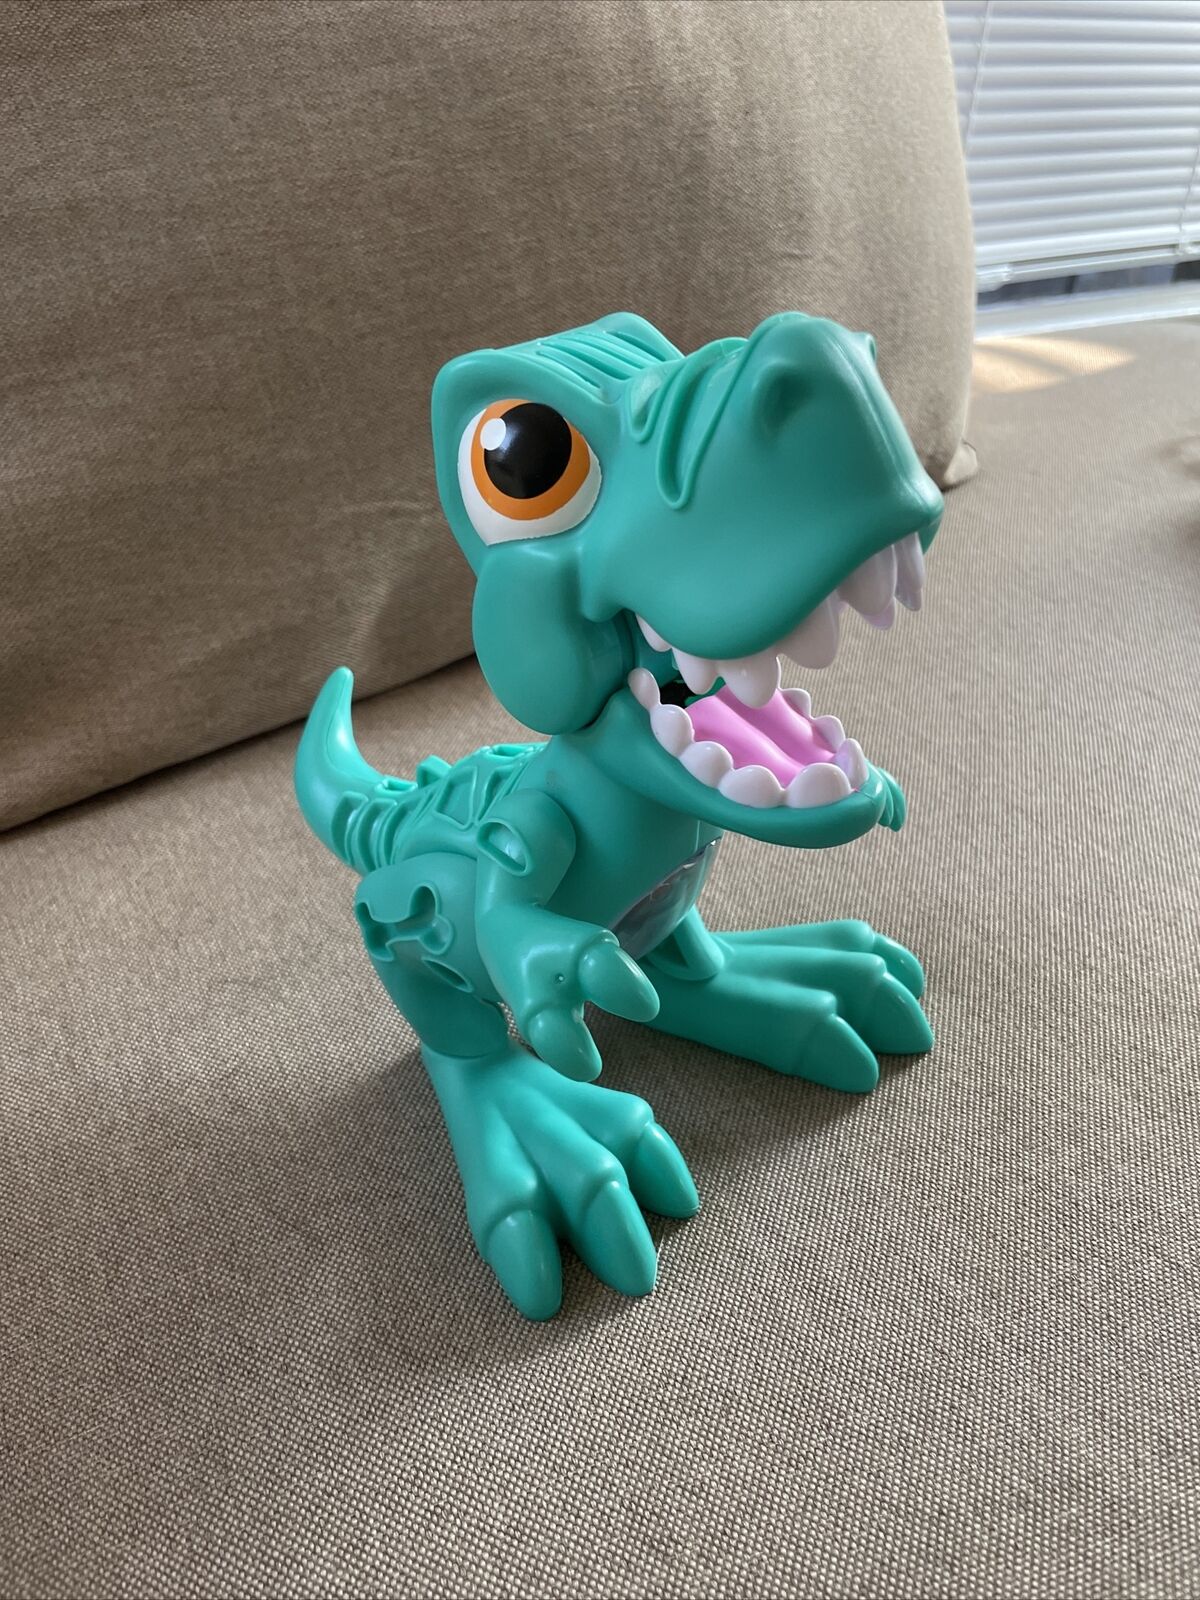 Play-doh Dino Crew Crunchin' T-rex Toy With Lot Of Play Doh Included